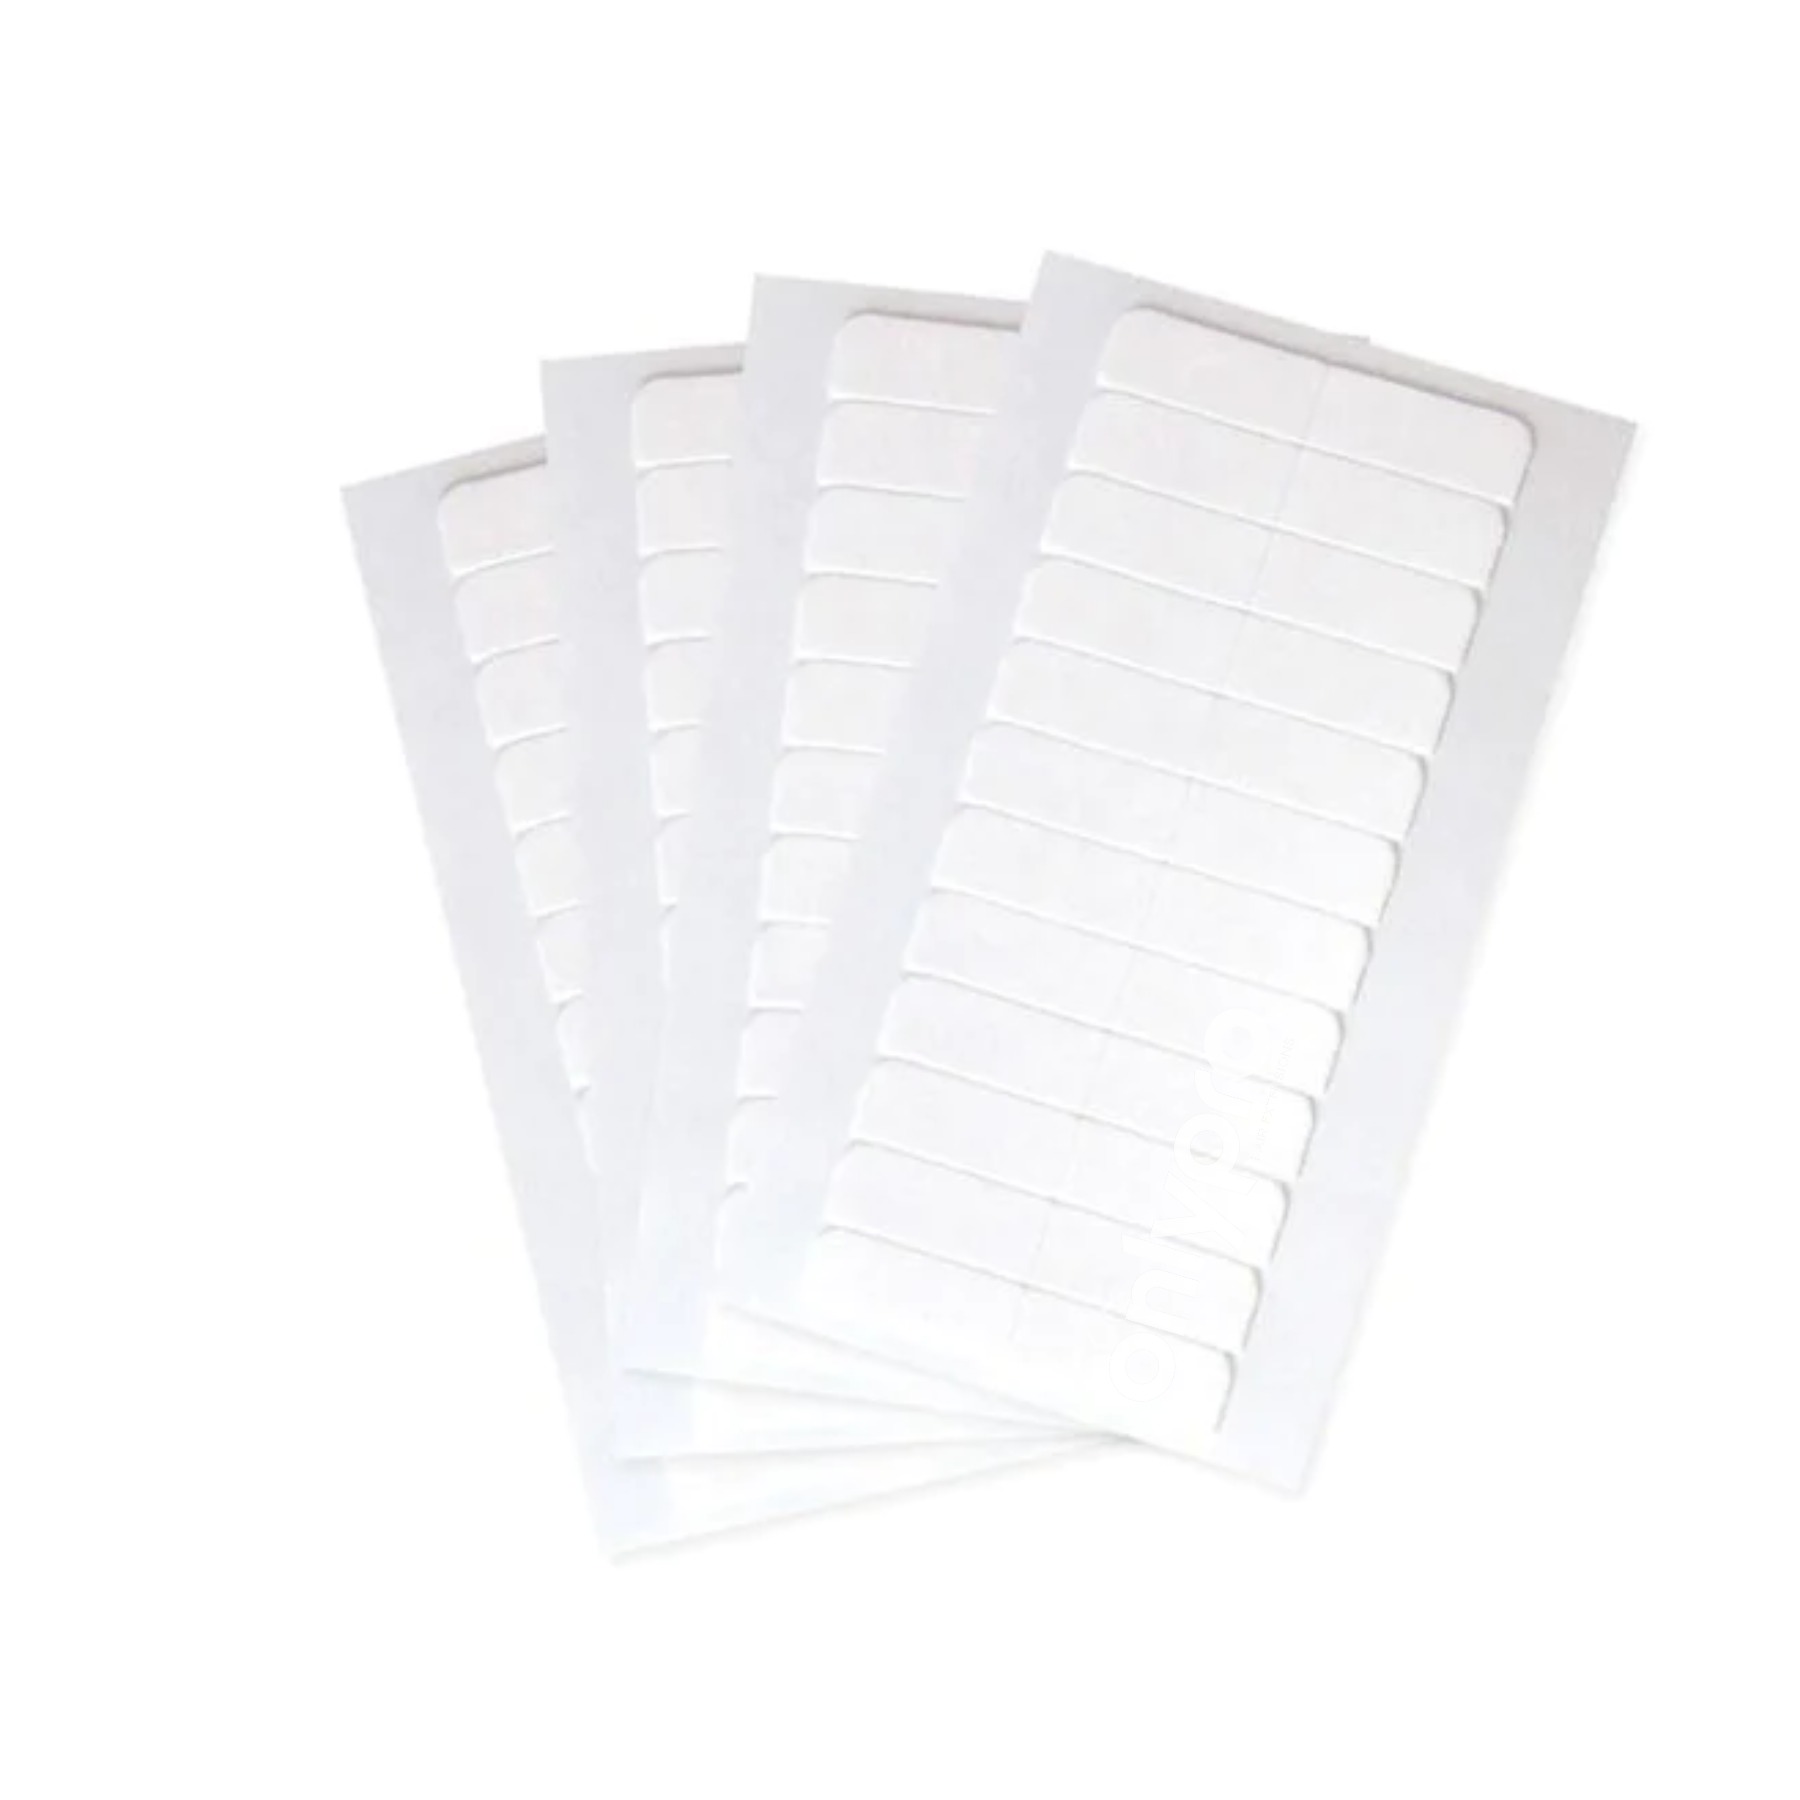 PRO WHITE REPLACEMENT TAPE TABS